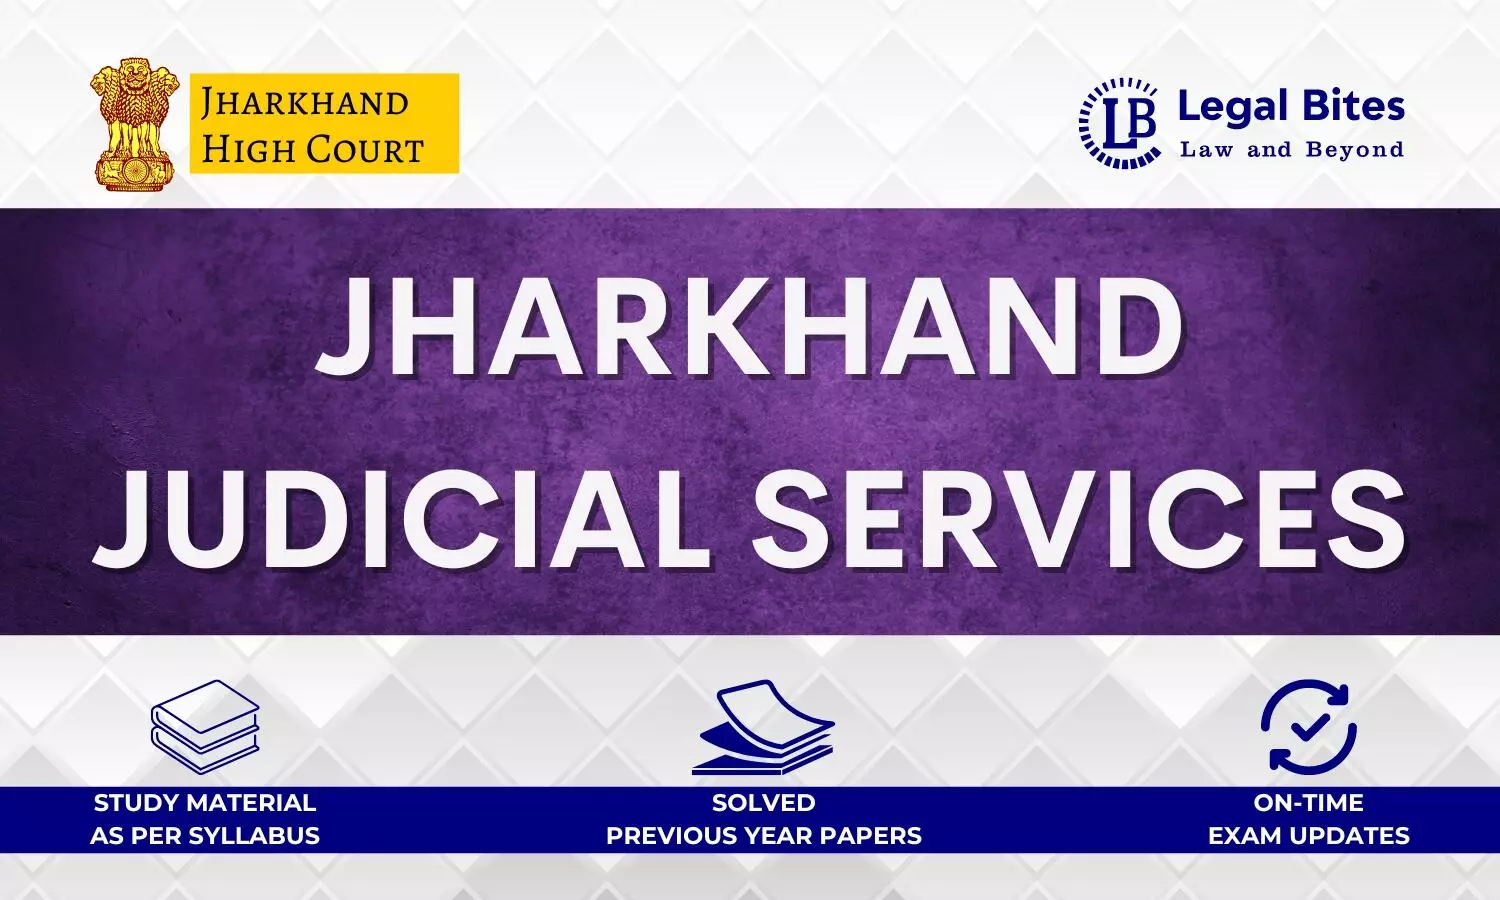 Jharkhand Judicial Services Examination: Study Material, Test Series and Tips